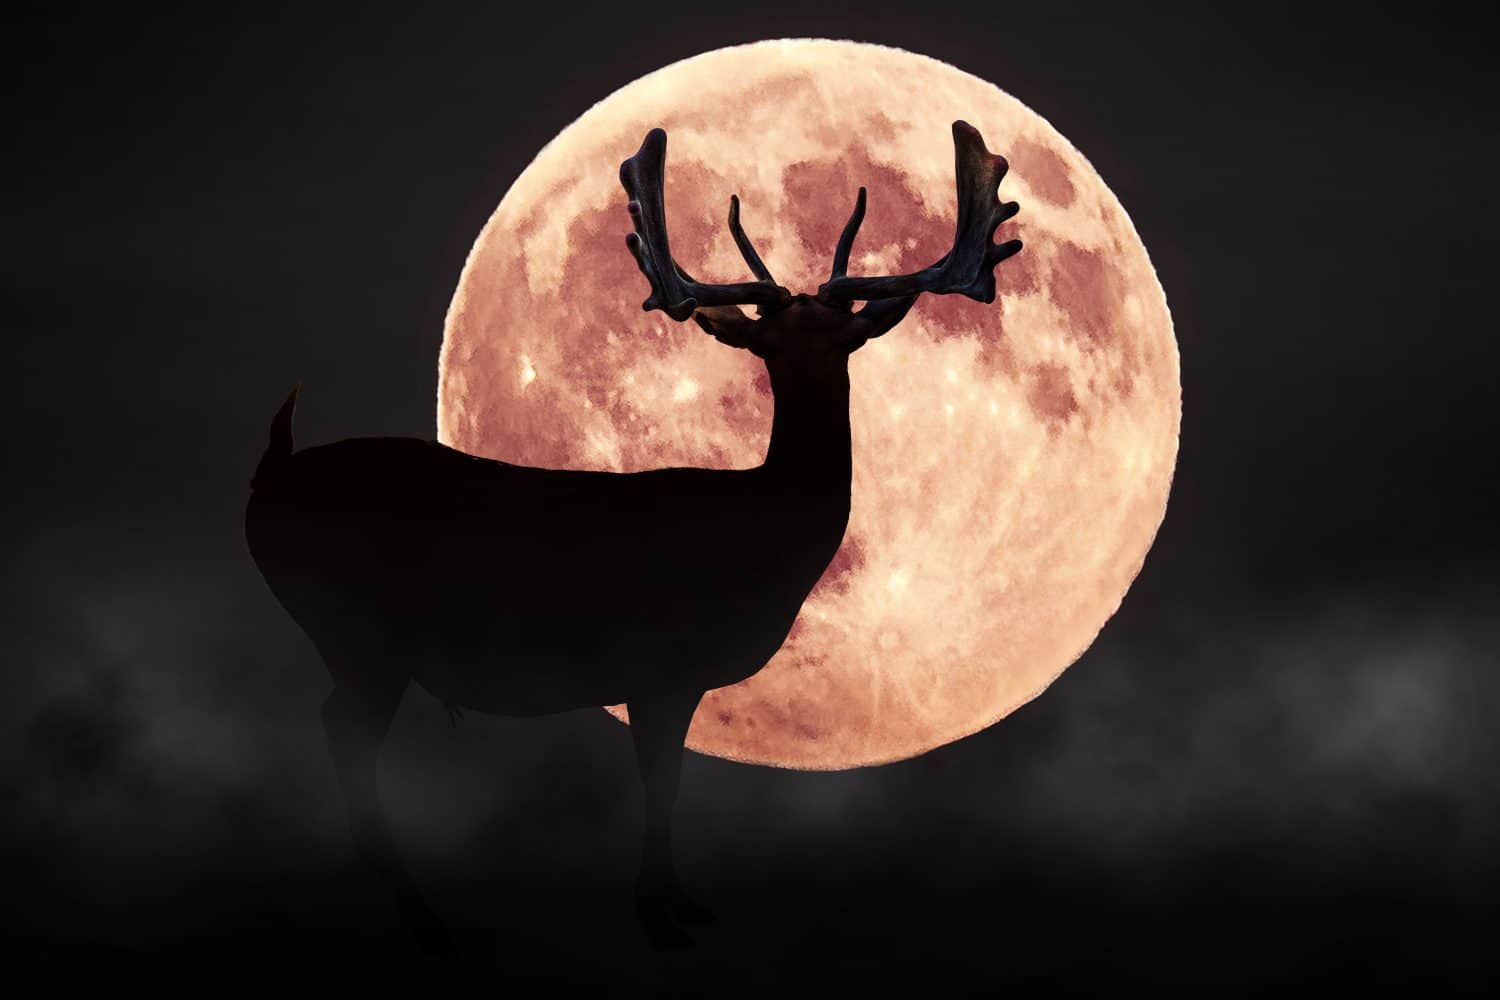 Silhouette deer on the background of red moon